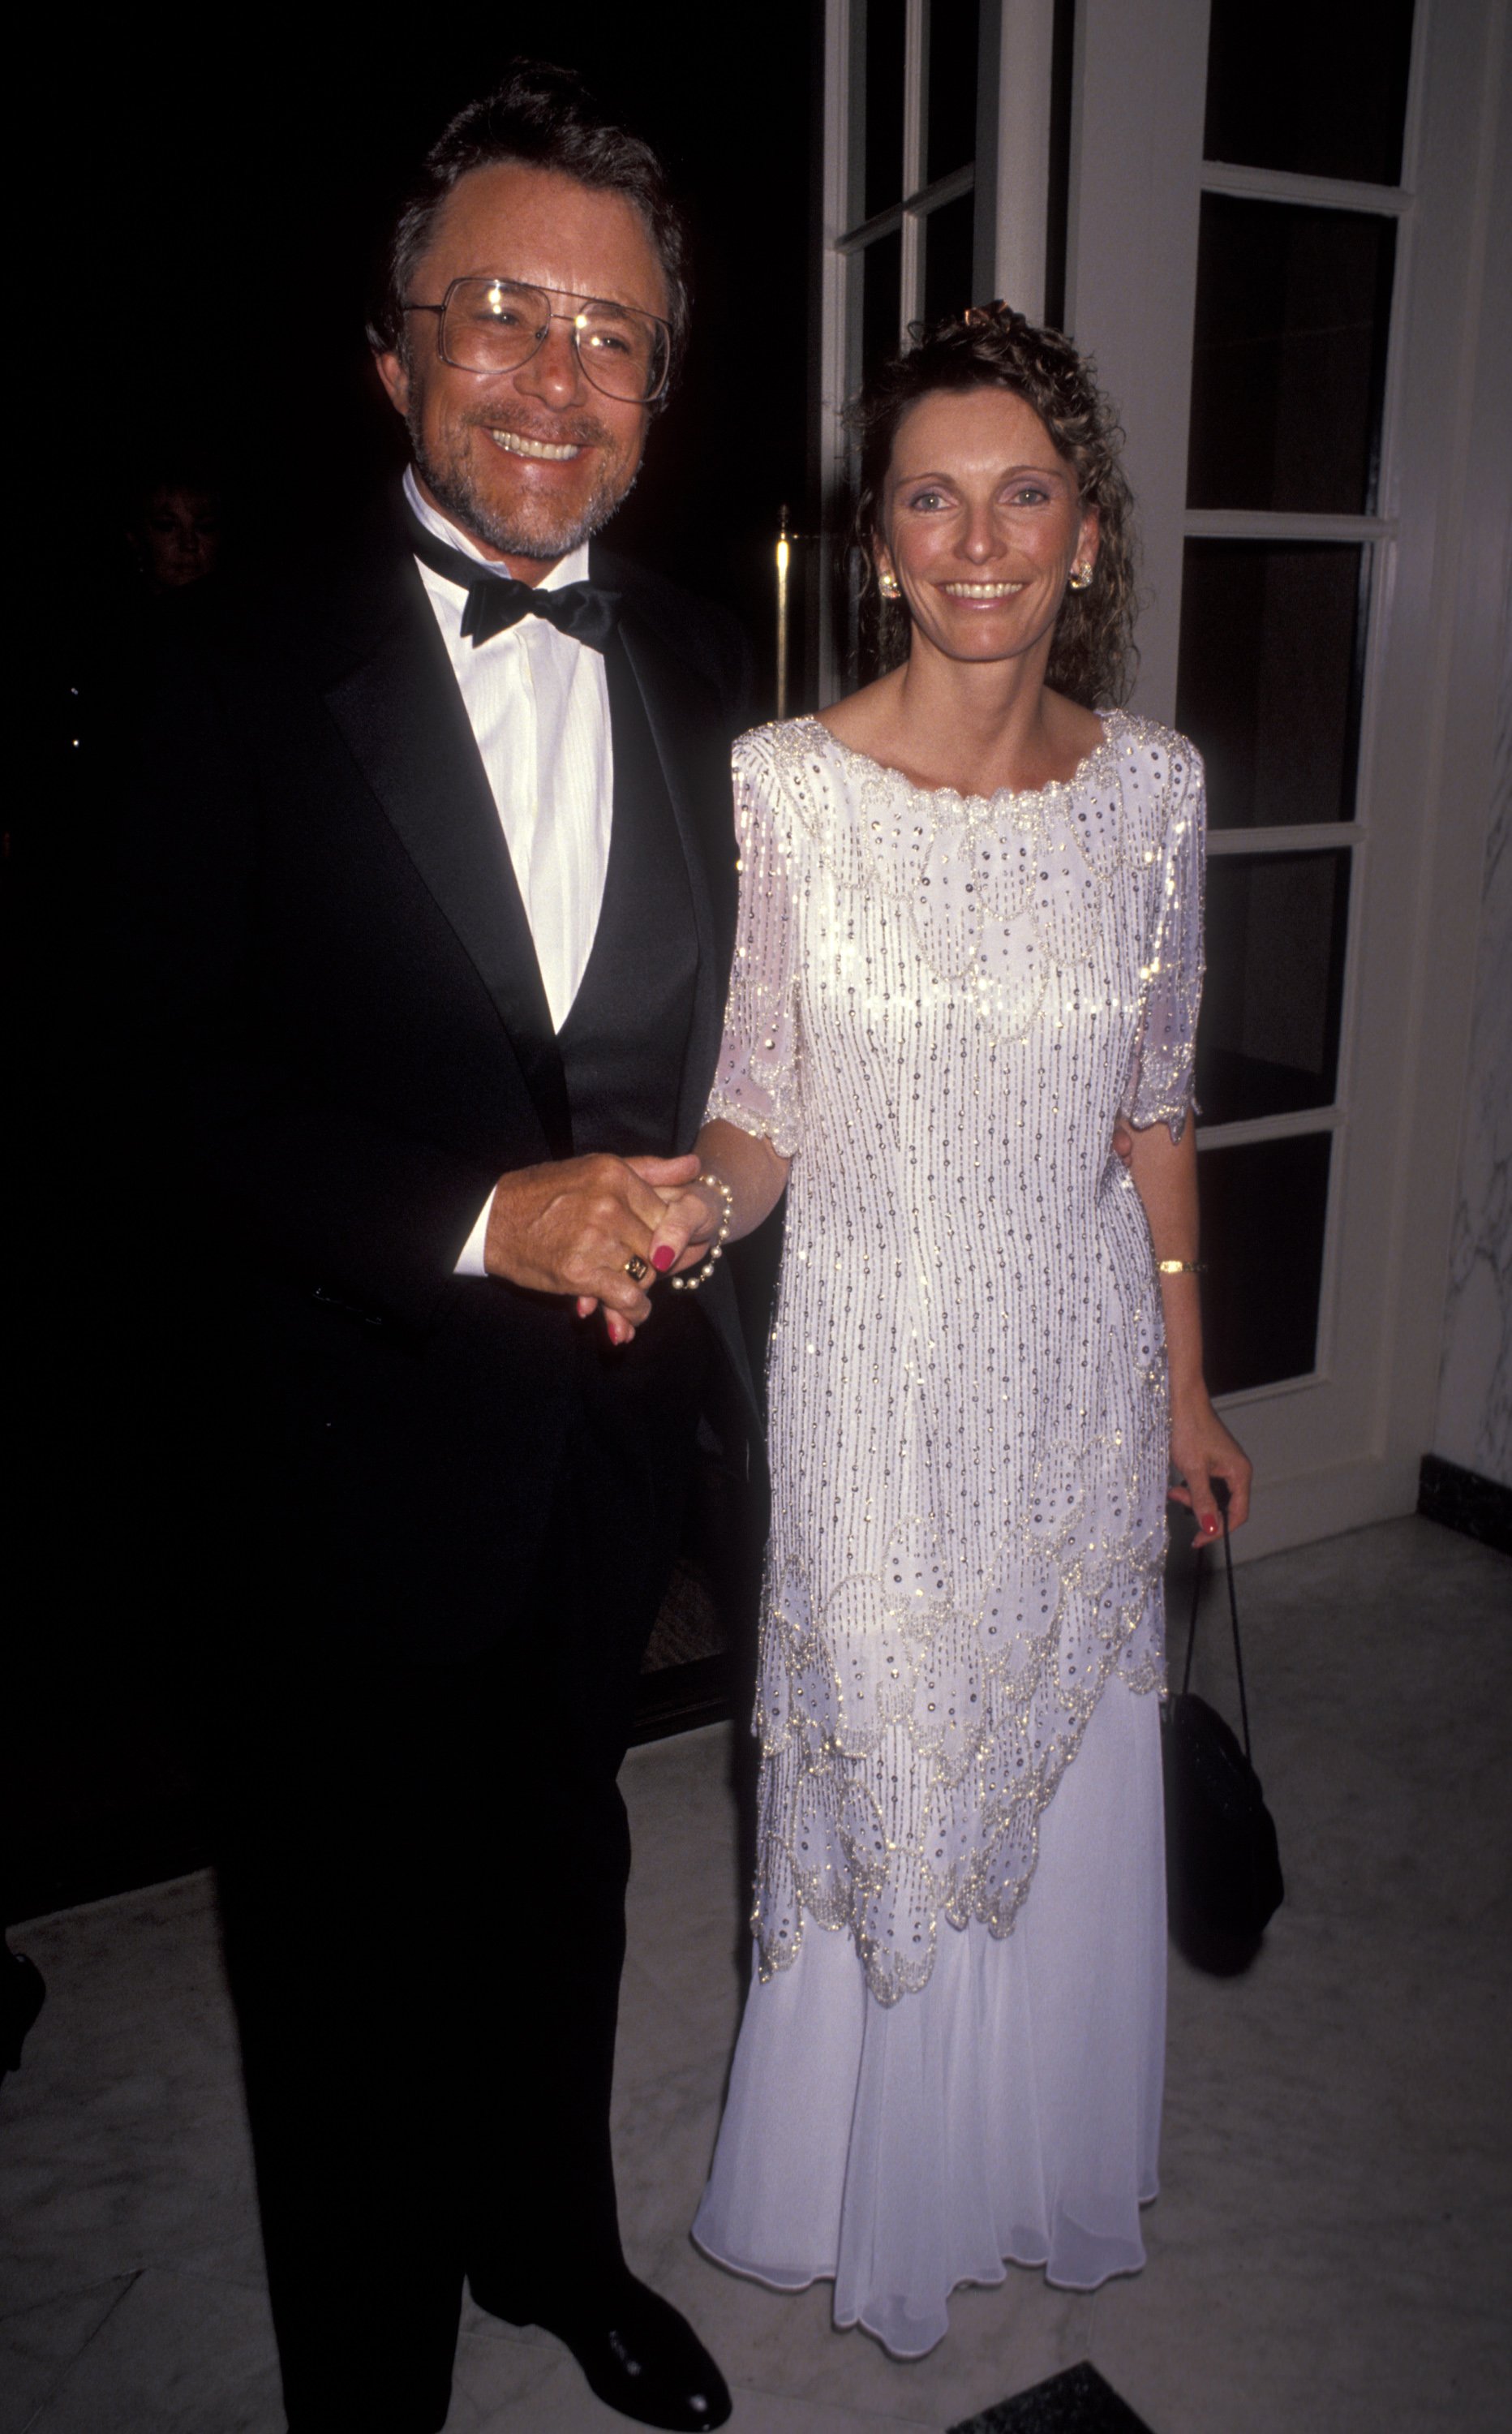 Actor Bill Bixby and Laura Michael at Television Academy Hall of Fame Awards Gala on September 23, 1991 at the Beverly Wilshire Hotel in Beverly Hills, California. | Source: Getty Images